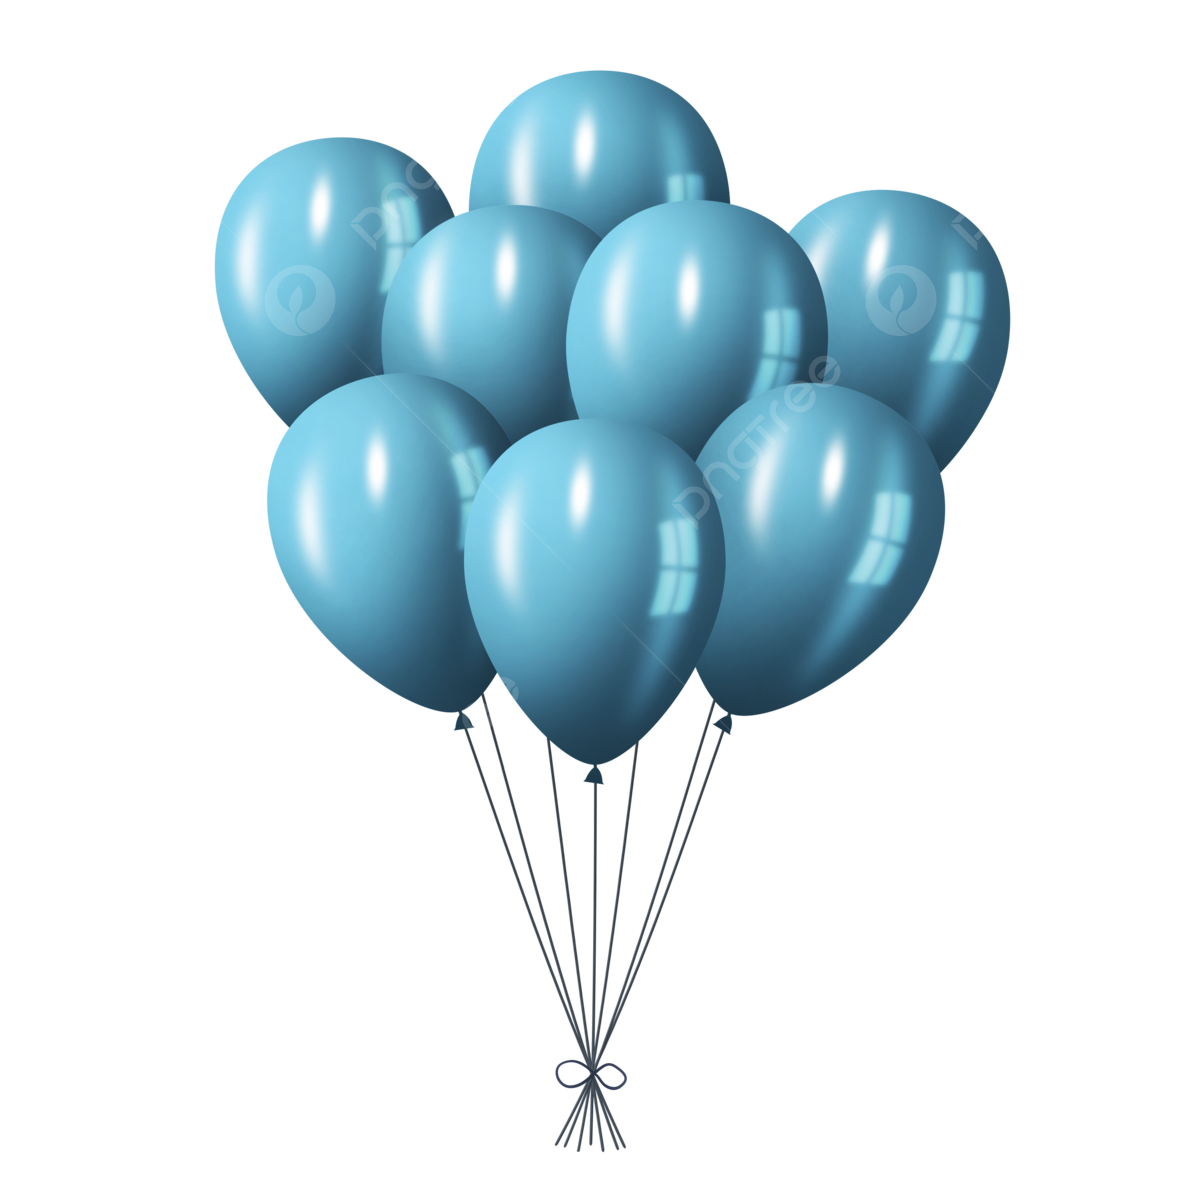 Blue Balloons PNG Image File